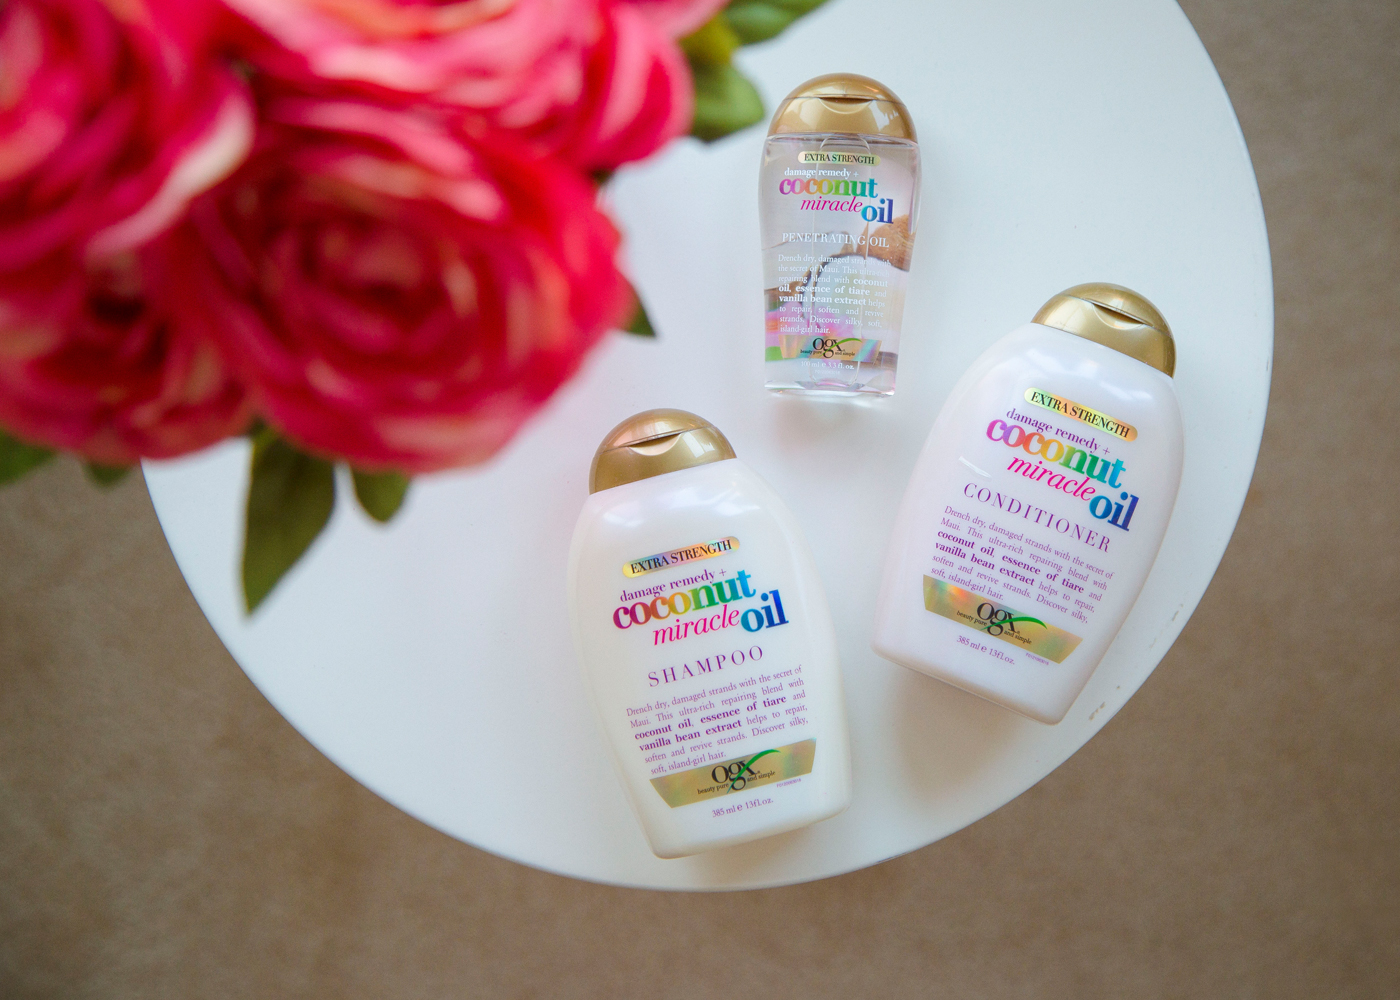 Getting My Hair In Summer Shape with the OGX Coconut Miracle Oil Collection